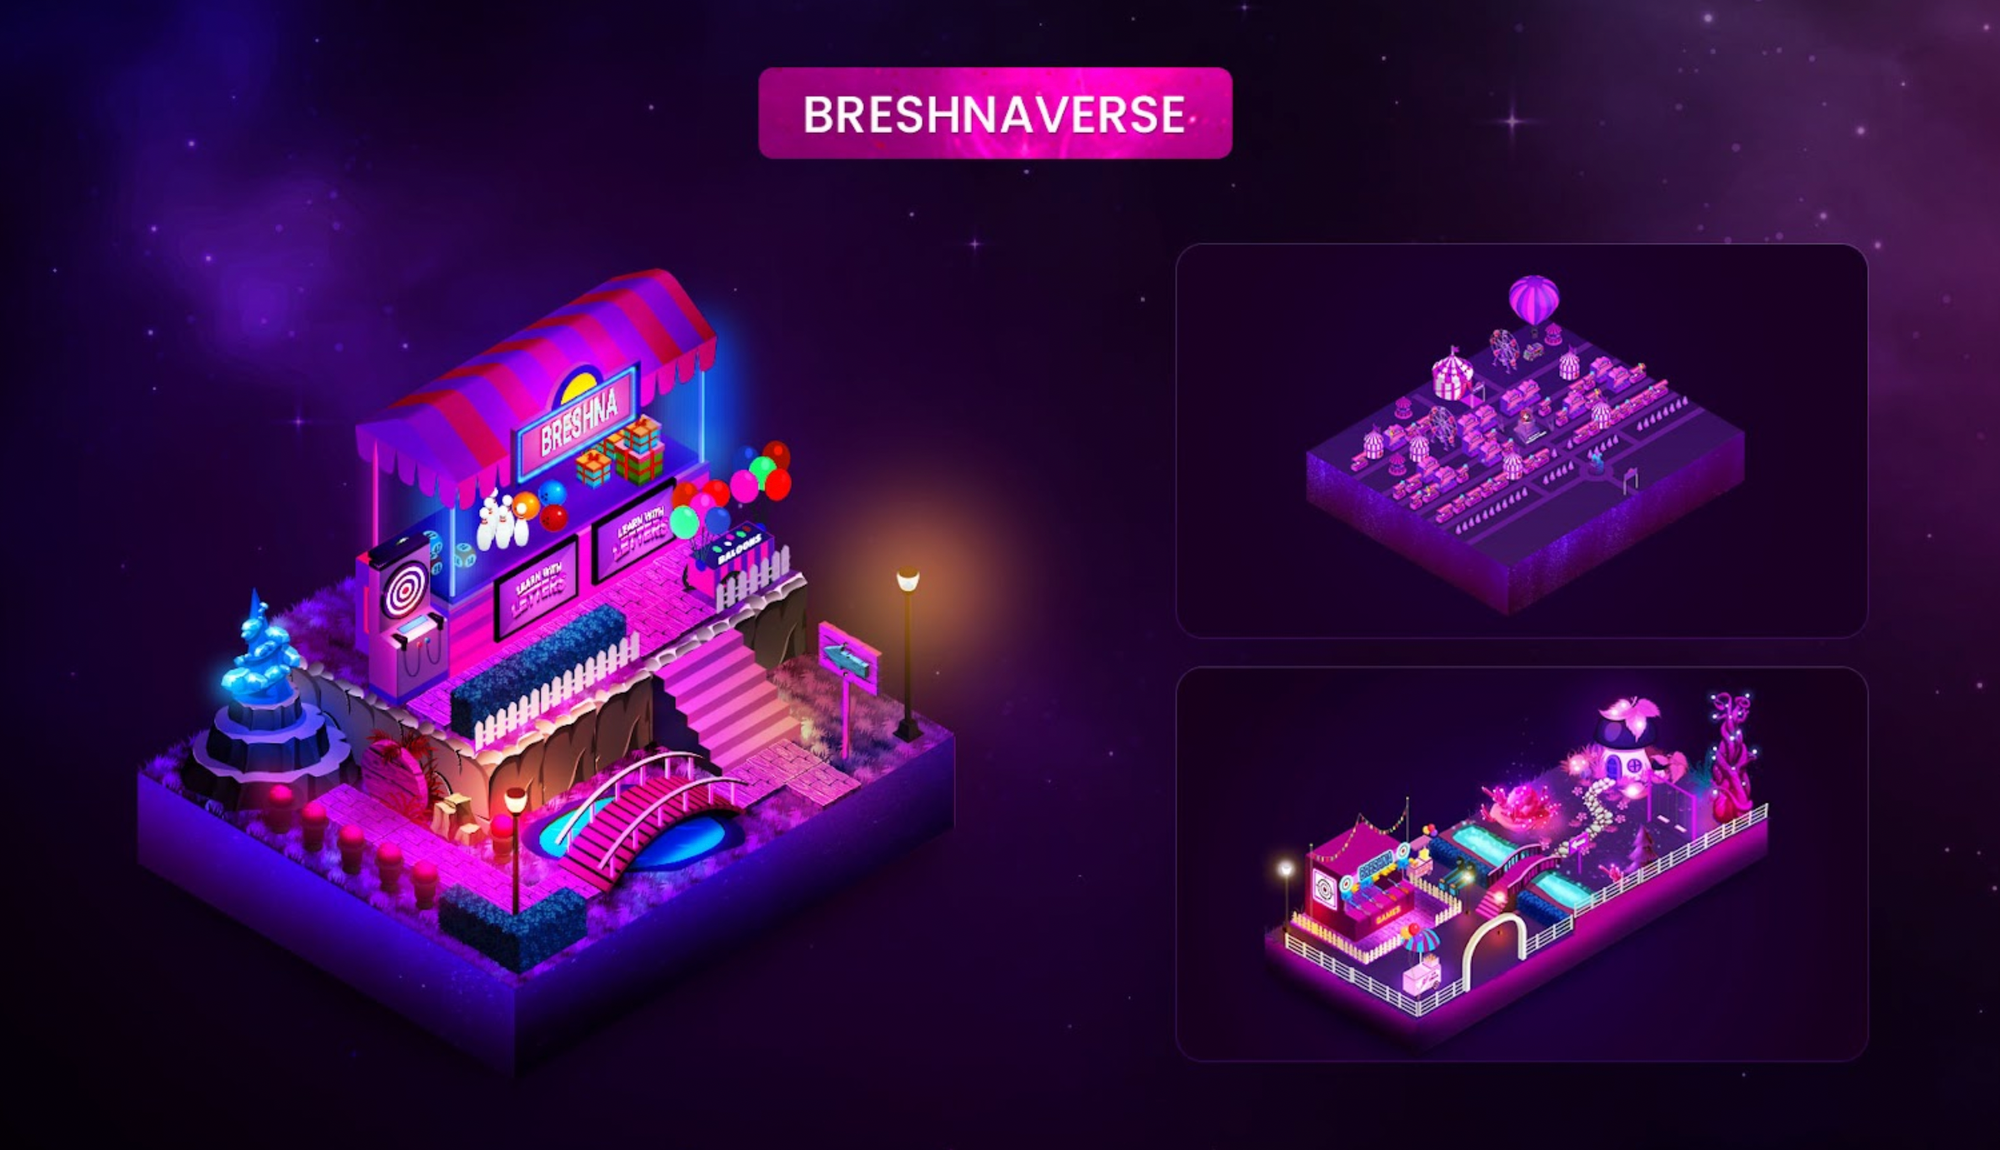 This photo shows artwork of a stand and virtual carnival for the Breshnaverse